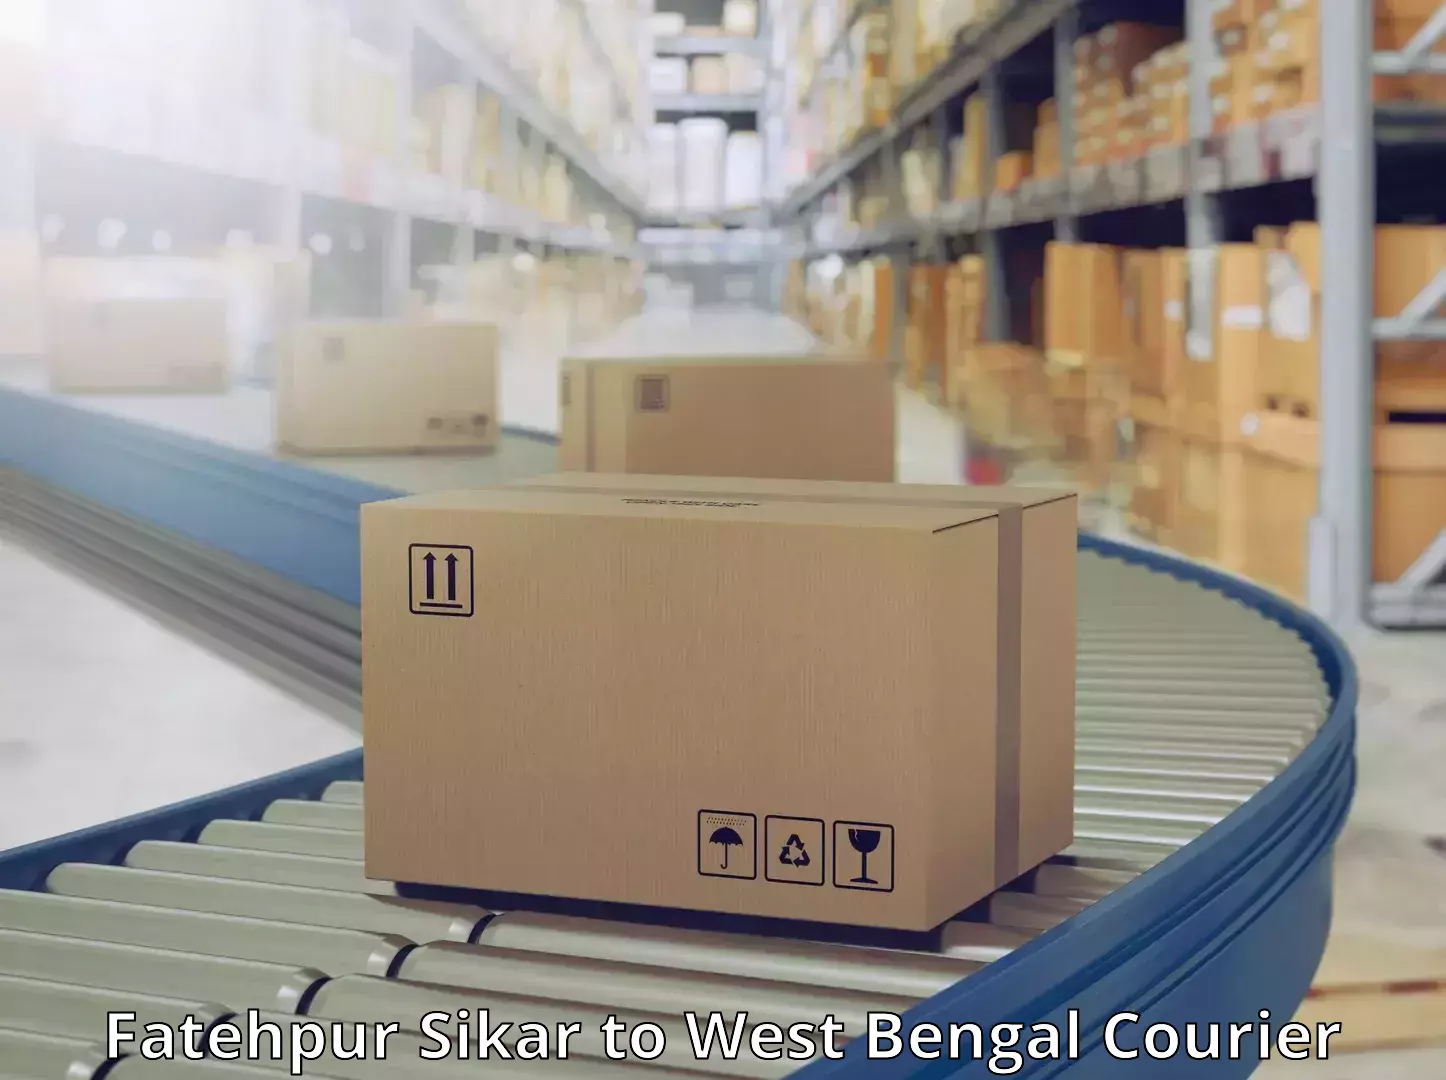 Reliable parcel services Fatehpur Sikar to Mejia